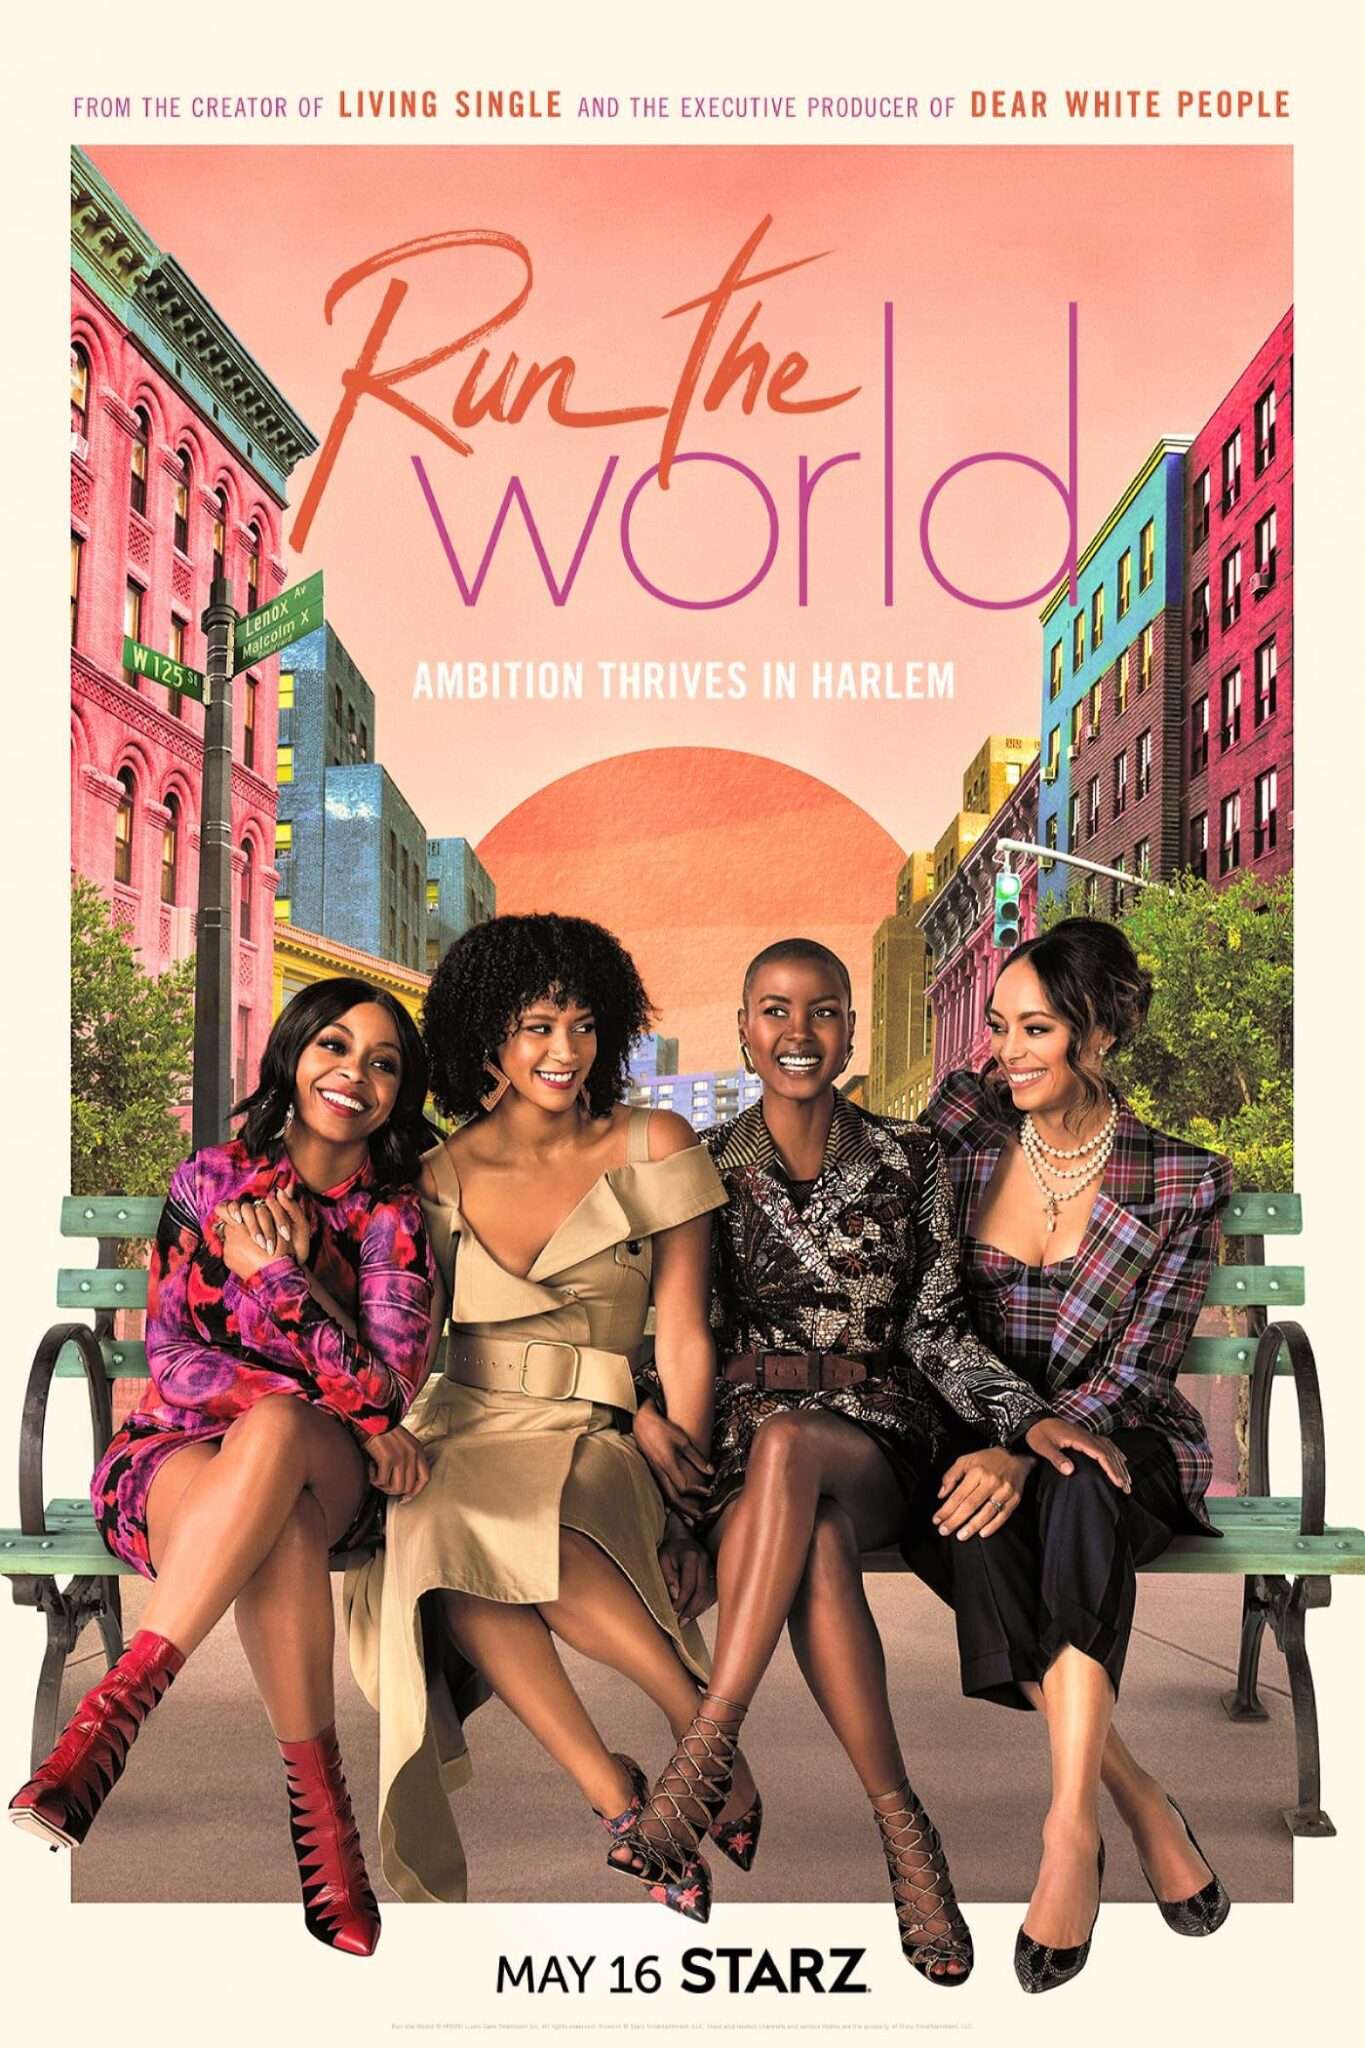 Starz Releases Official Trailer and Key Art for New Comedy Series "Run